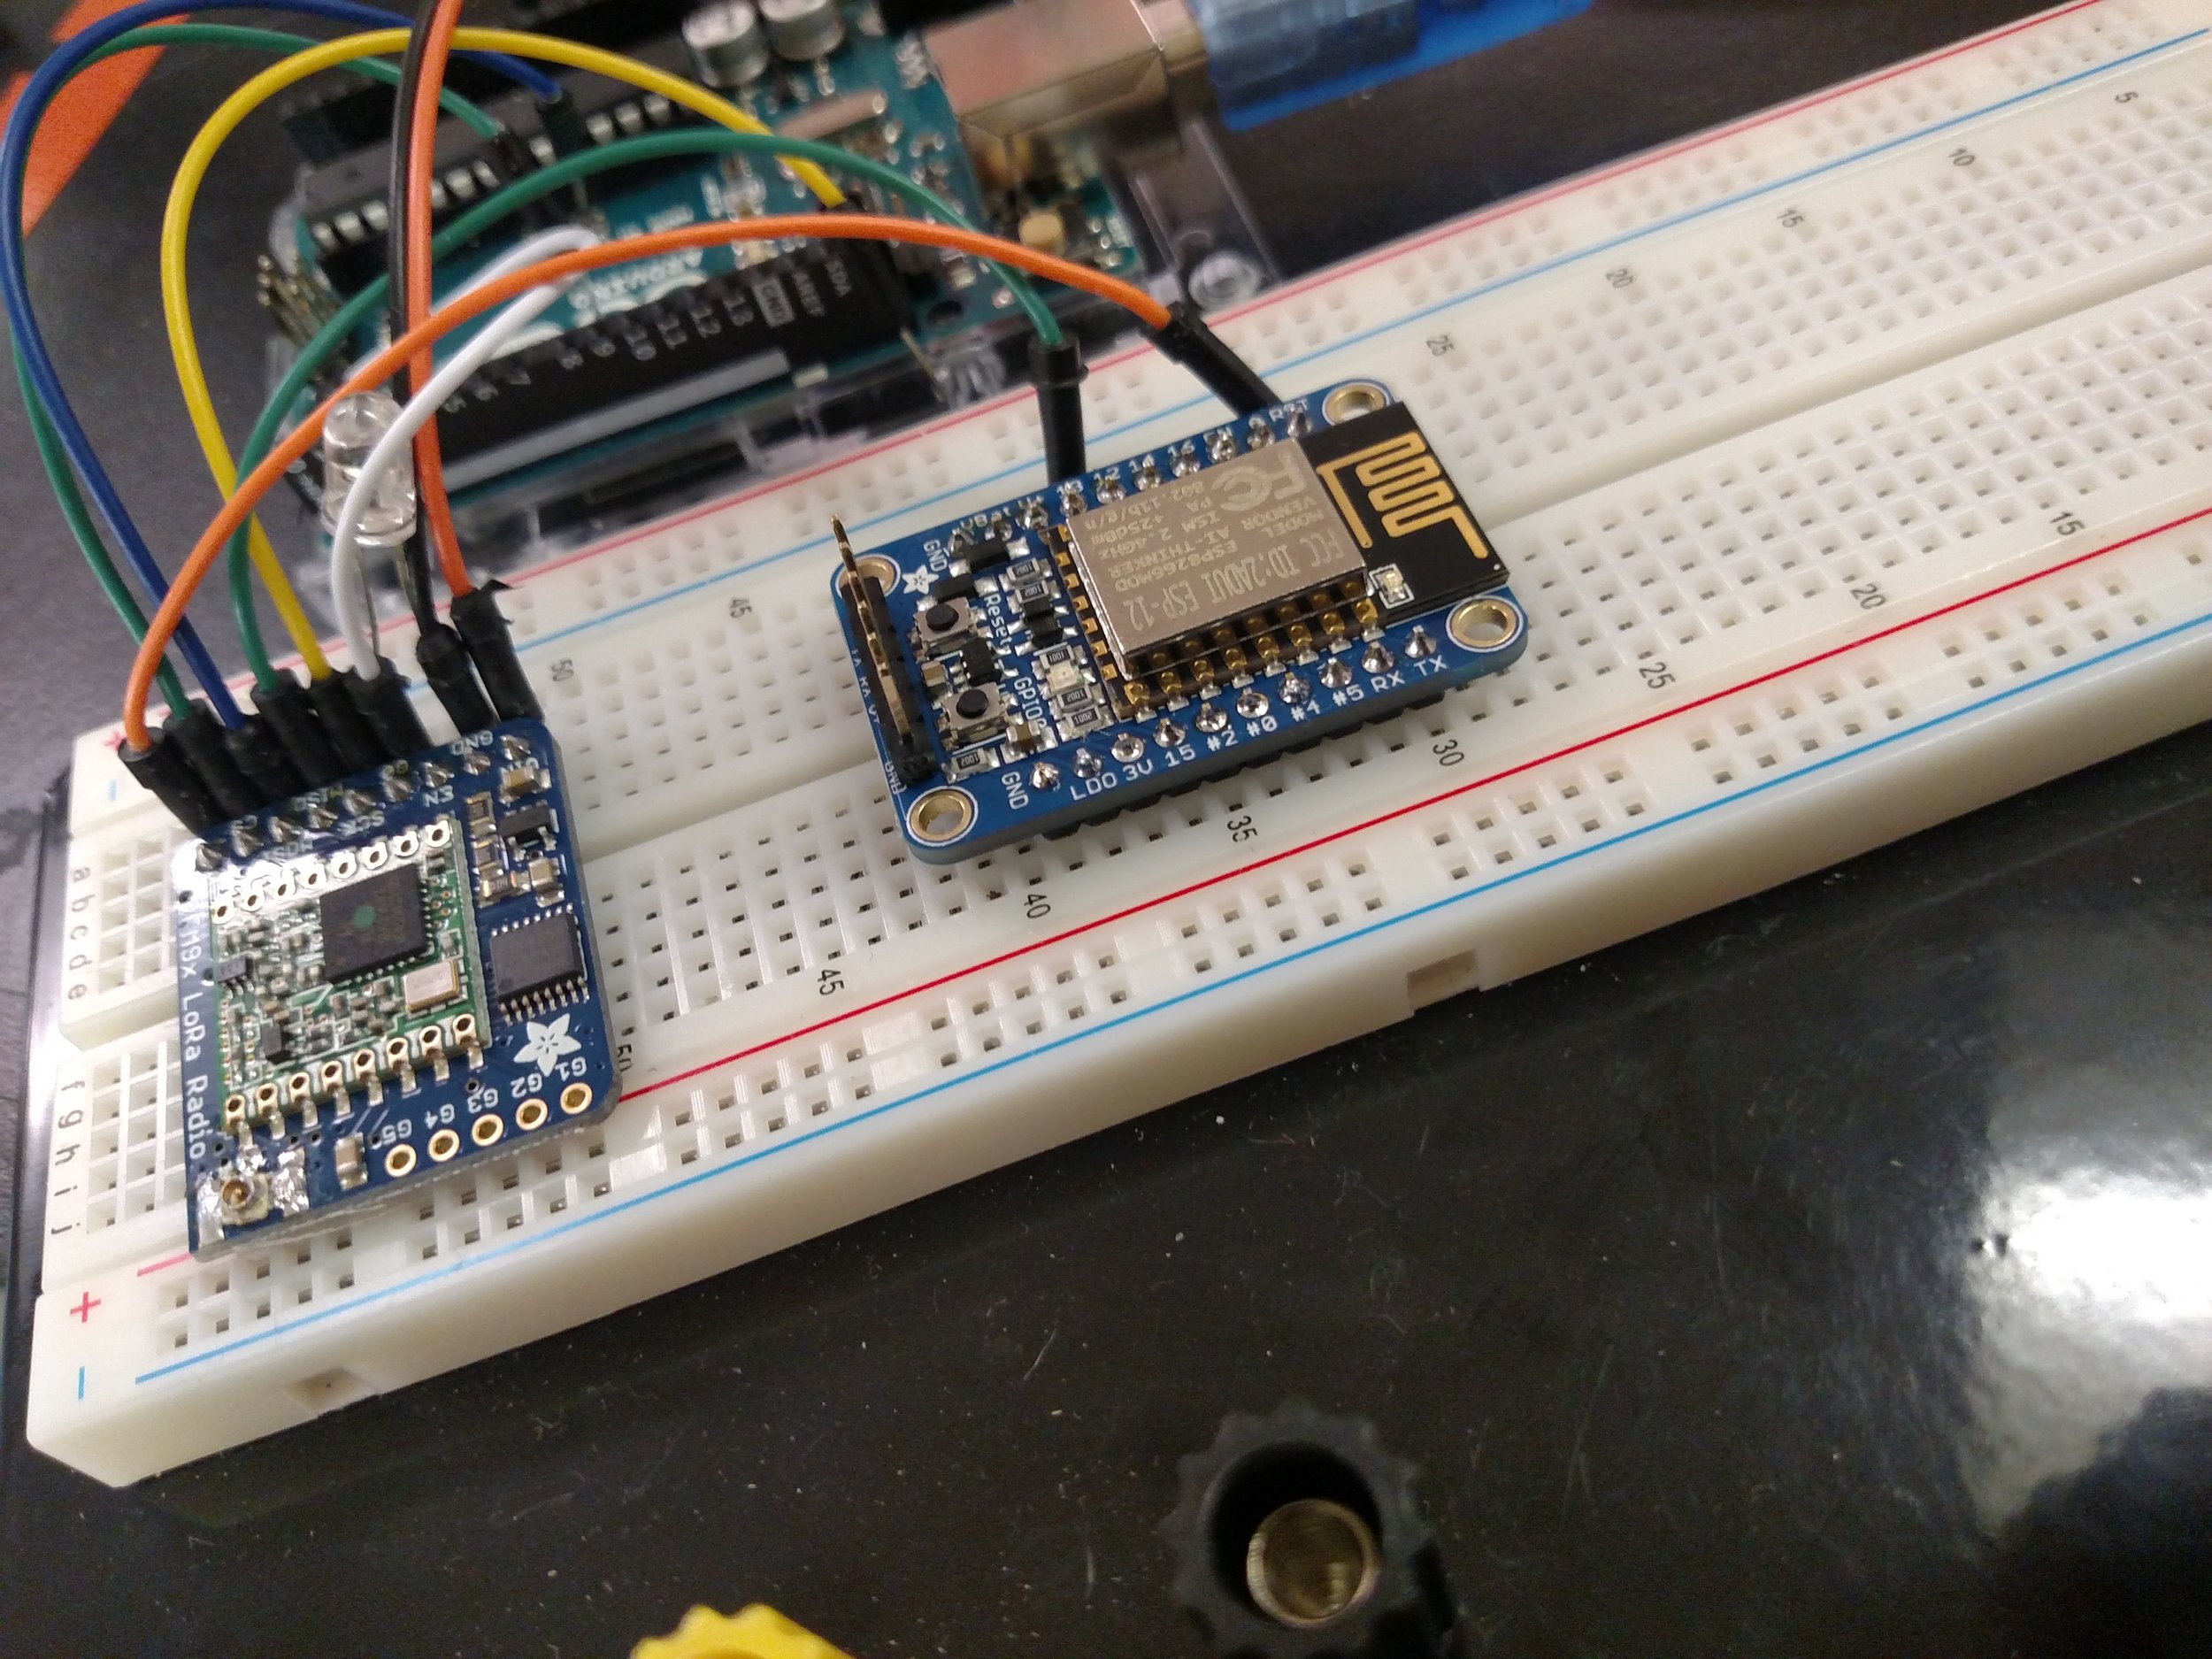 Work on integrating the LoRa radio receiver and the Huzzah ESP8266.&nbsp;